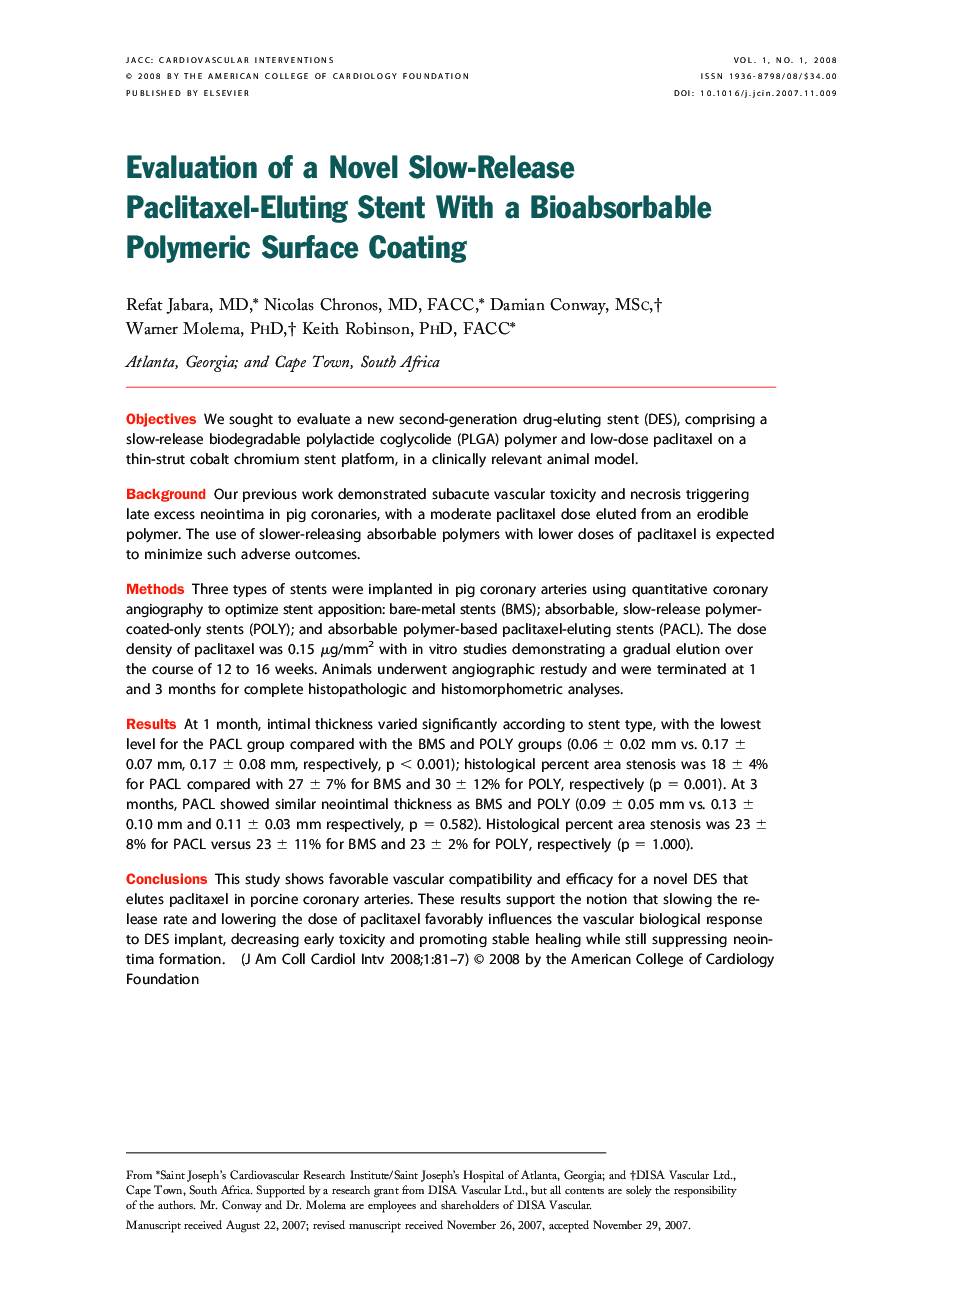 Evaluation of a Novel Slow-Release Paclitaxel-Eluting Stent With a Bioabsorbable Polymeric Surface Coating 